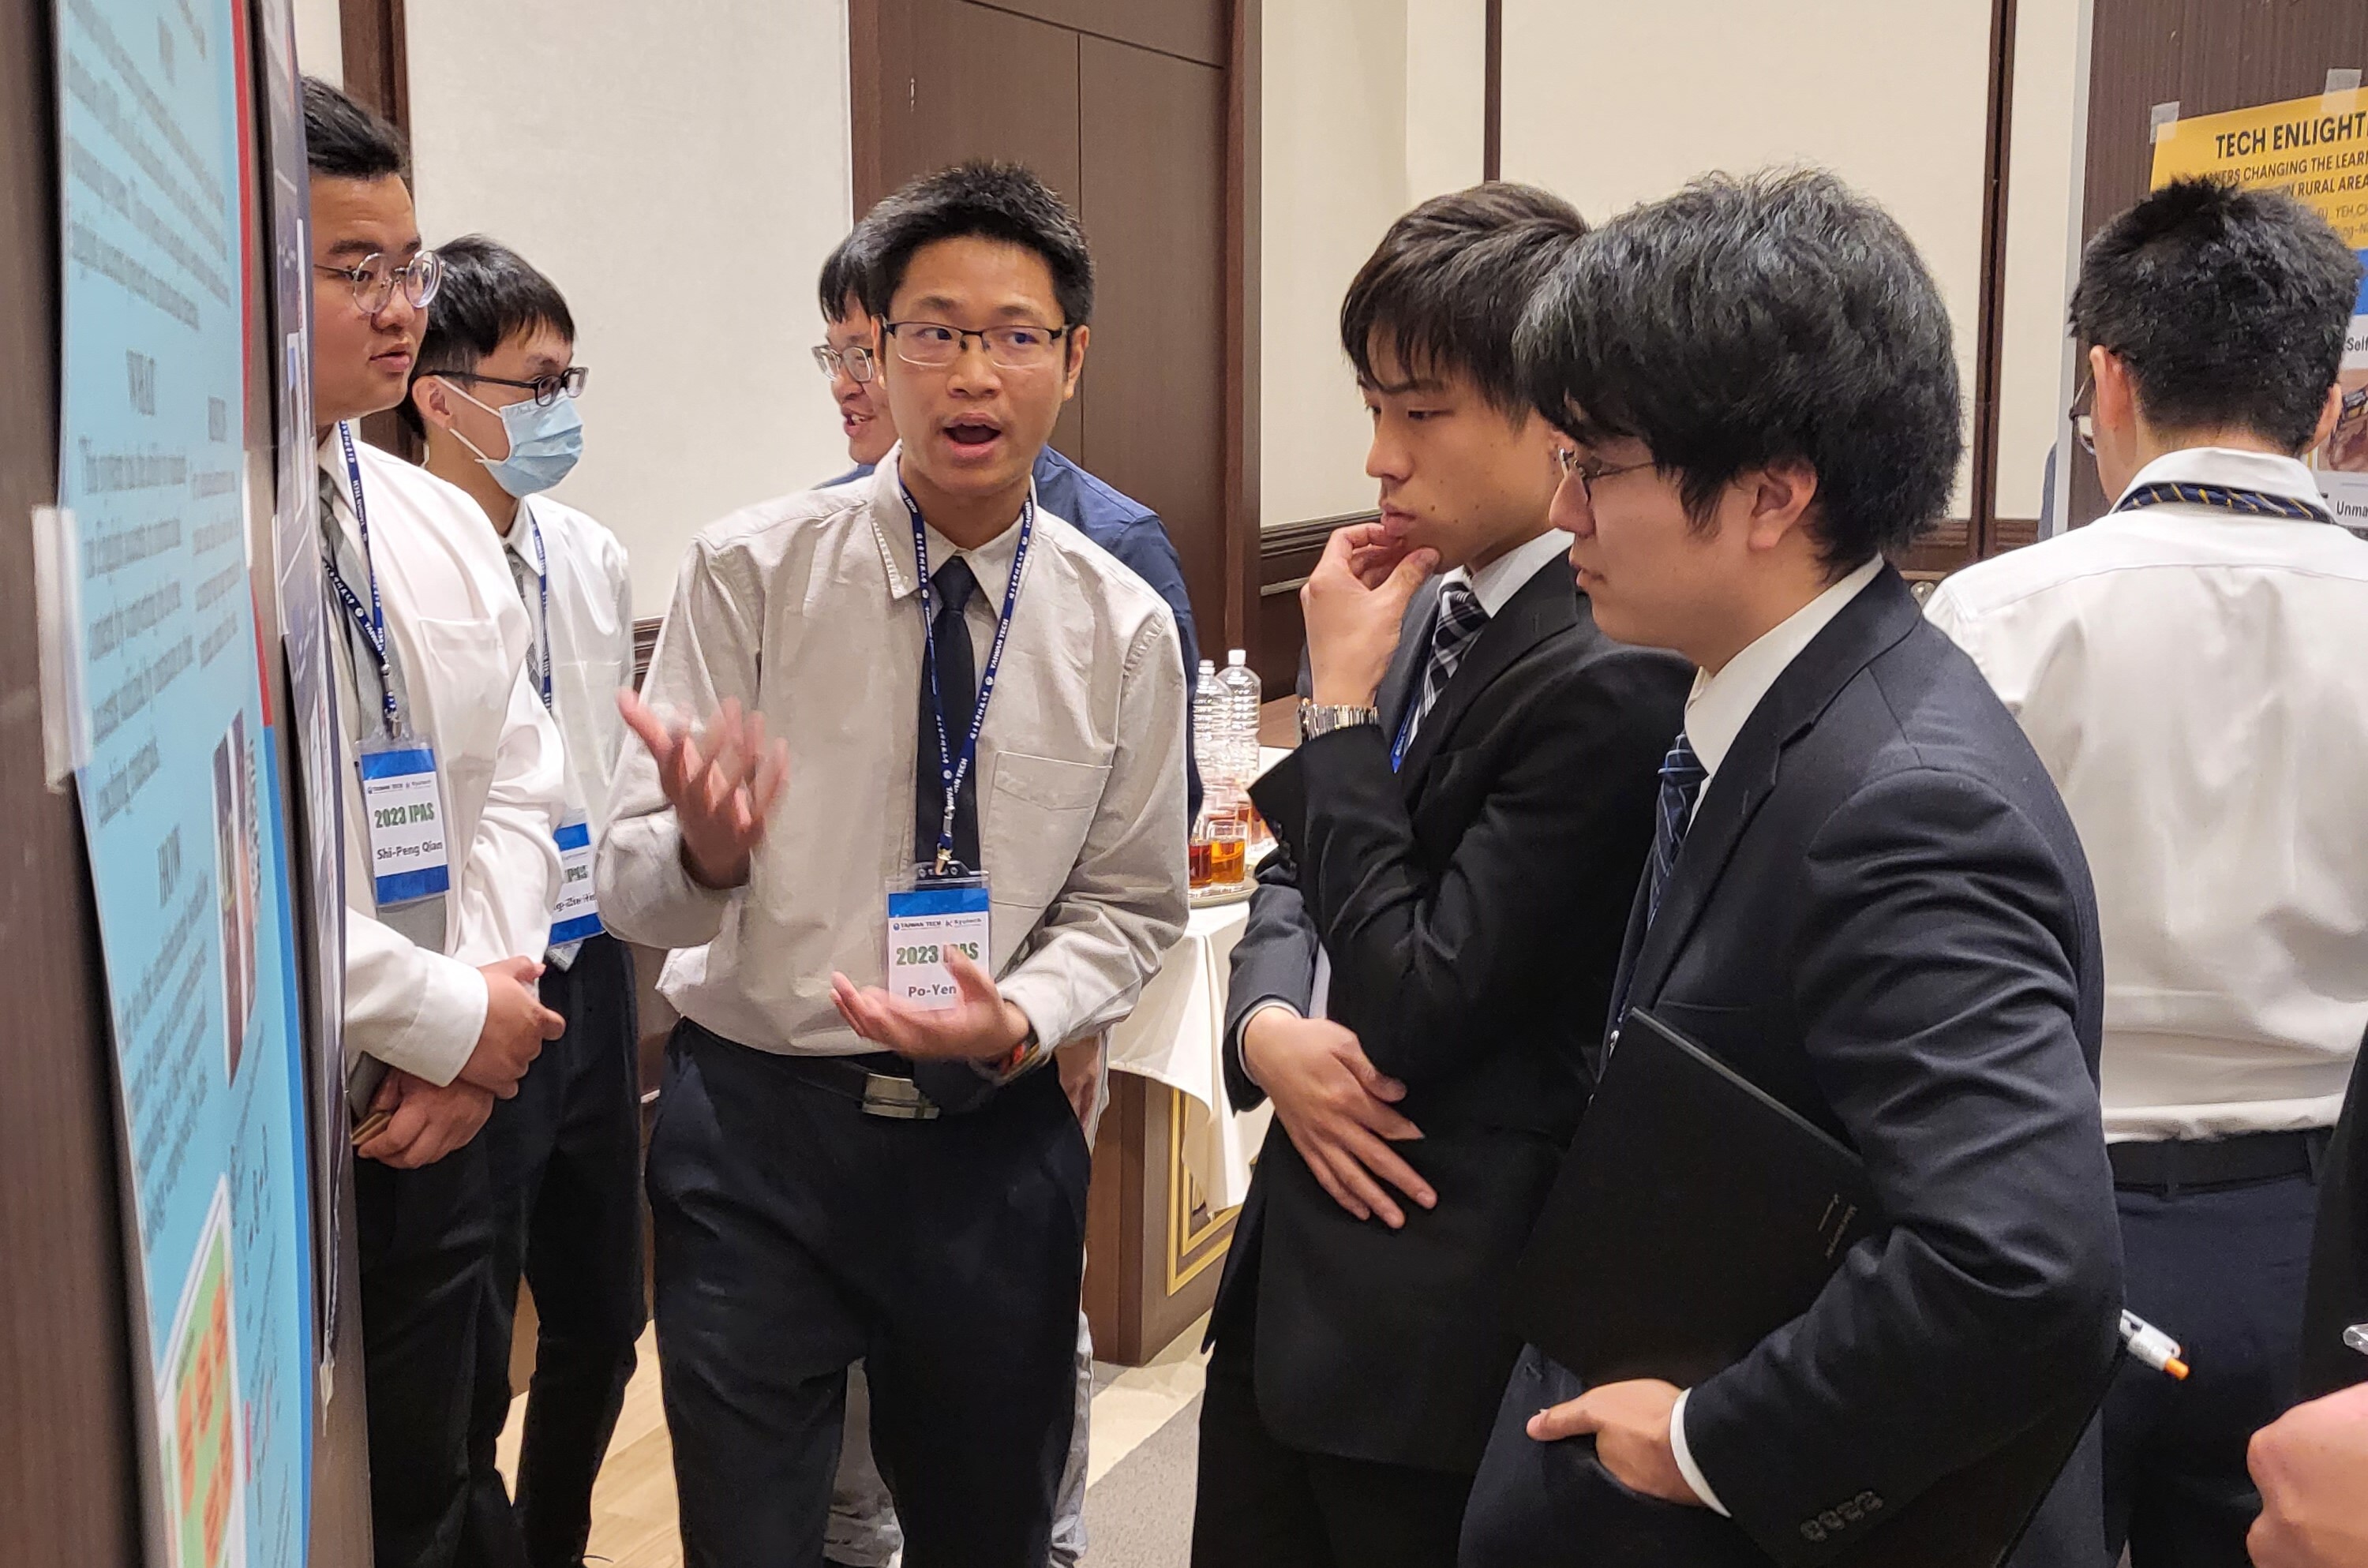 Students from Taiwan Tech and students from Kyushu Institute of Technology introduced their research topics and engaged in interactive exchanges.